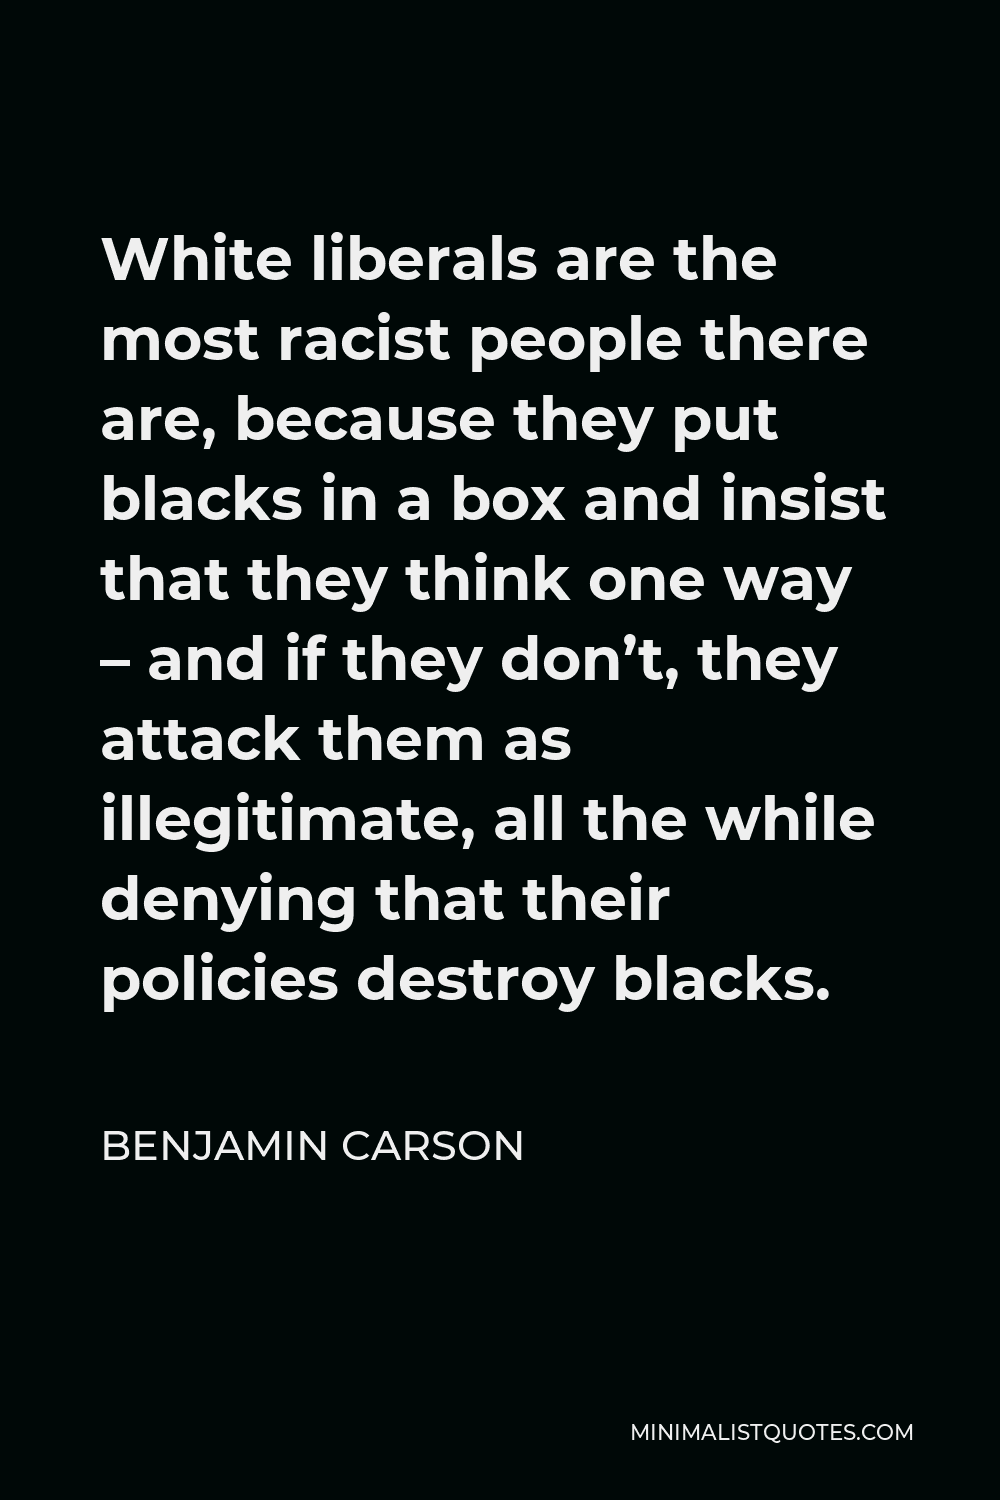 Benjamin Carson Quote - White liberals are the most racist people there are, because they put blacks in a box and insist that they think one way – and if they don’t, they attack them as illegitimate, all the while denying that their policies destroy blacks.